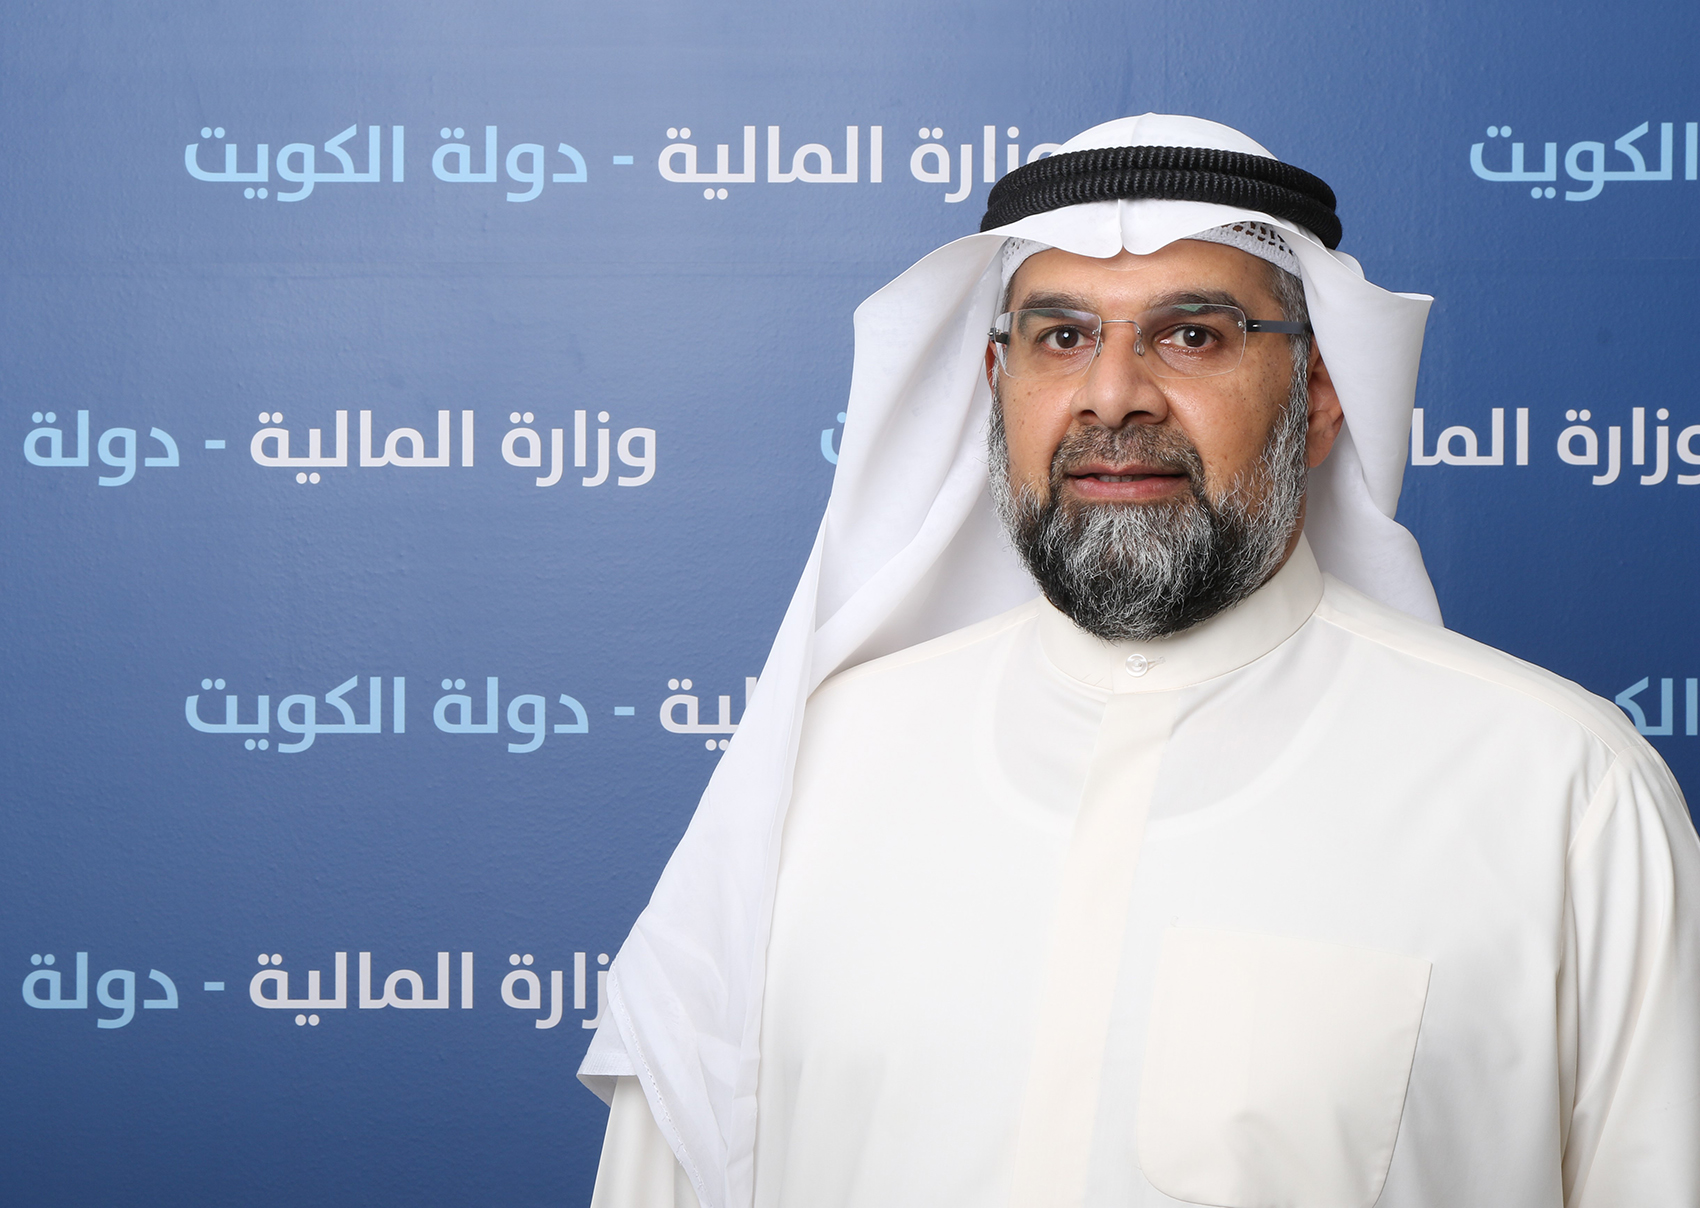 Kuwait's Finance Ministry Undersecretary and chairman of the compensation team Saleh Al-Saraawi